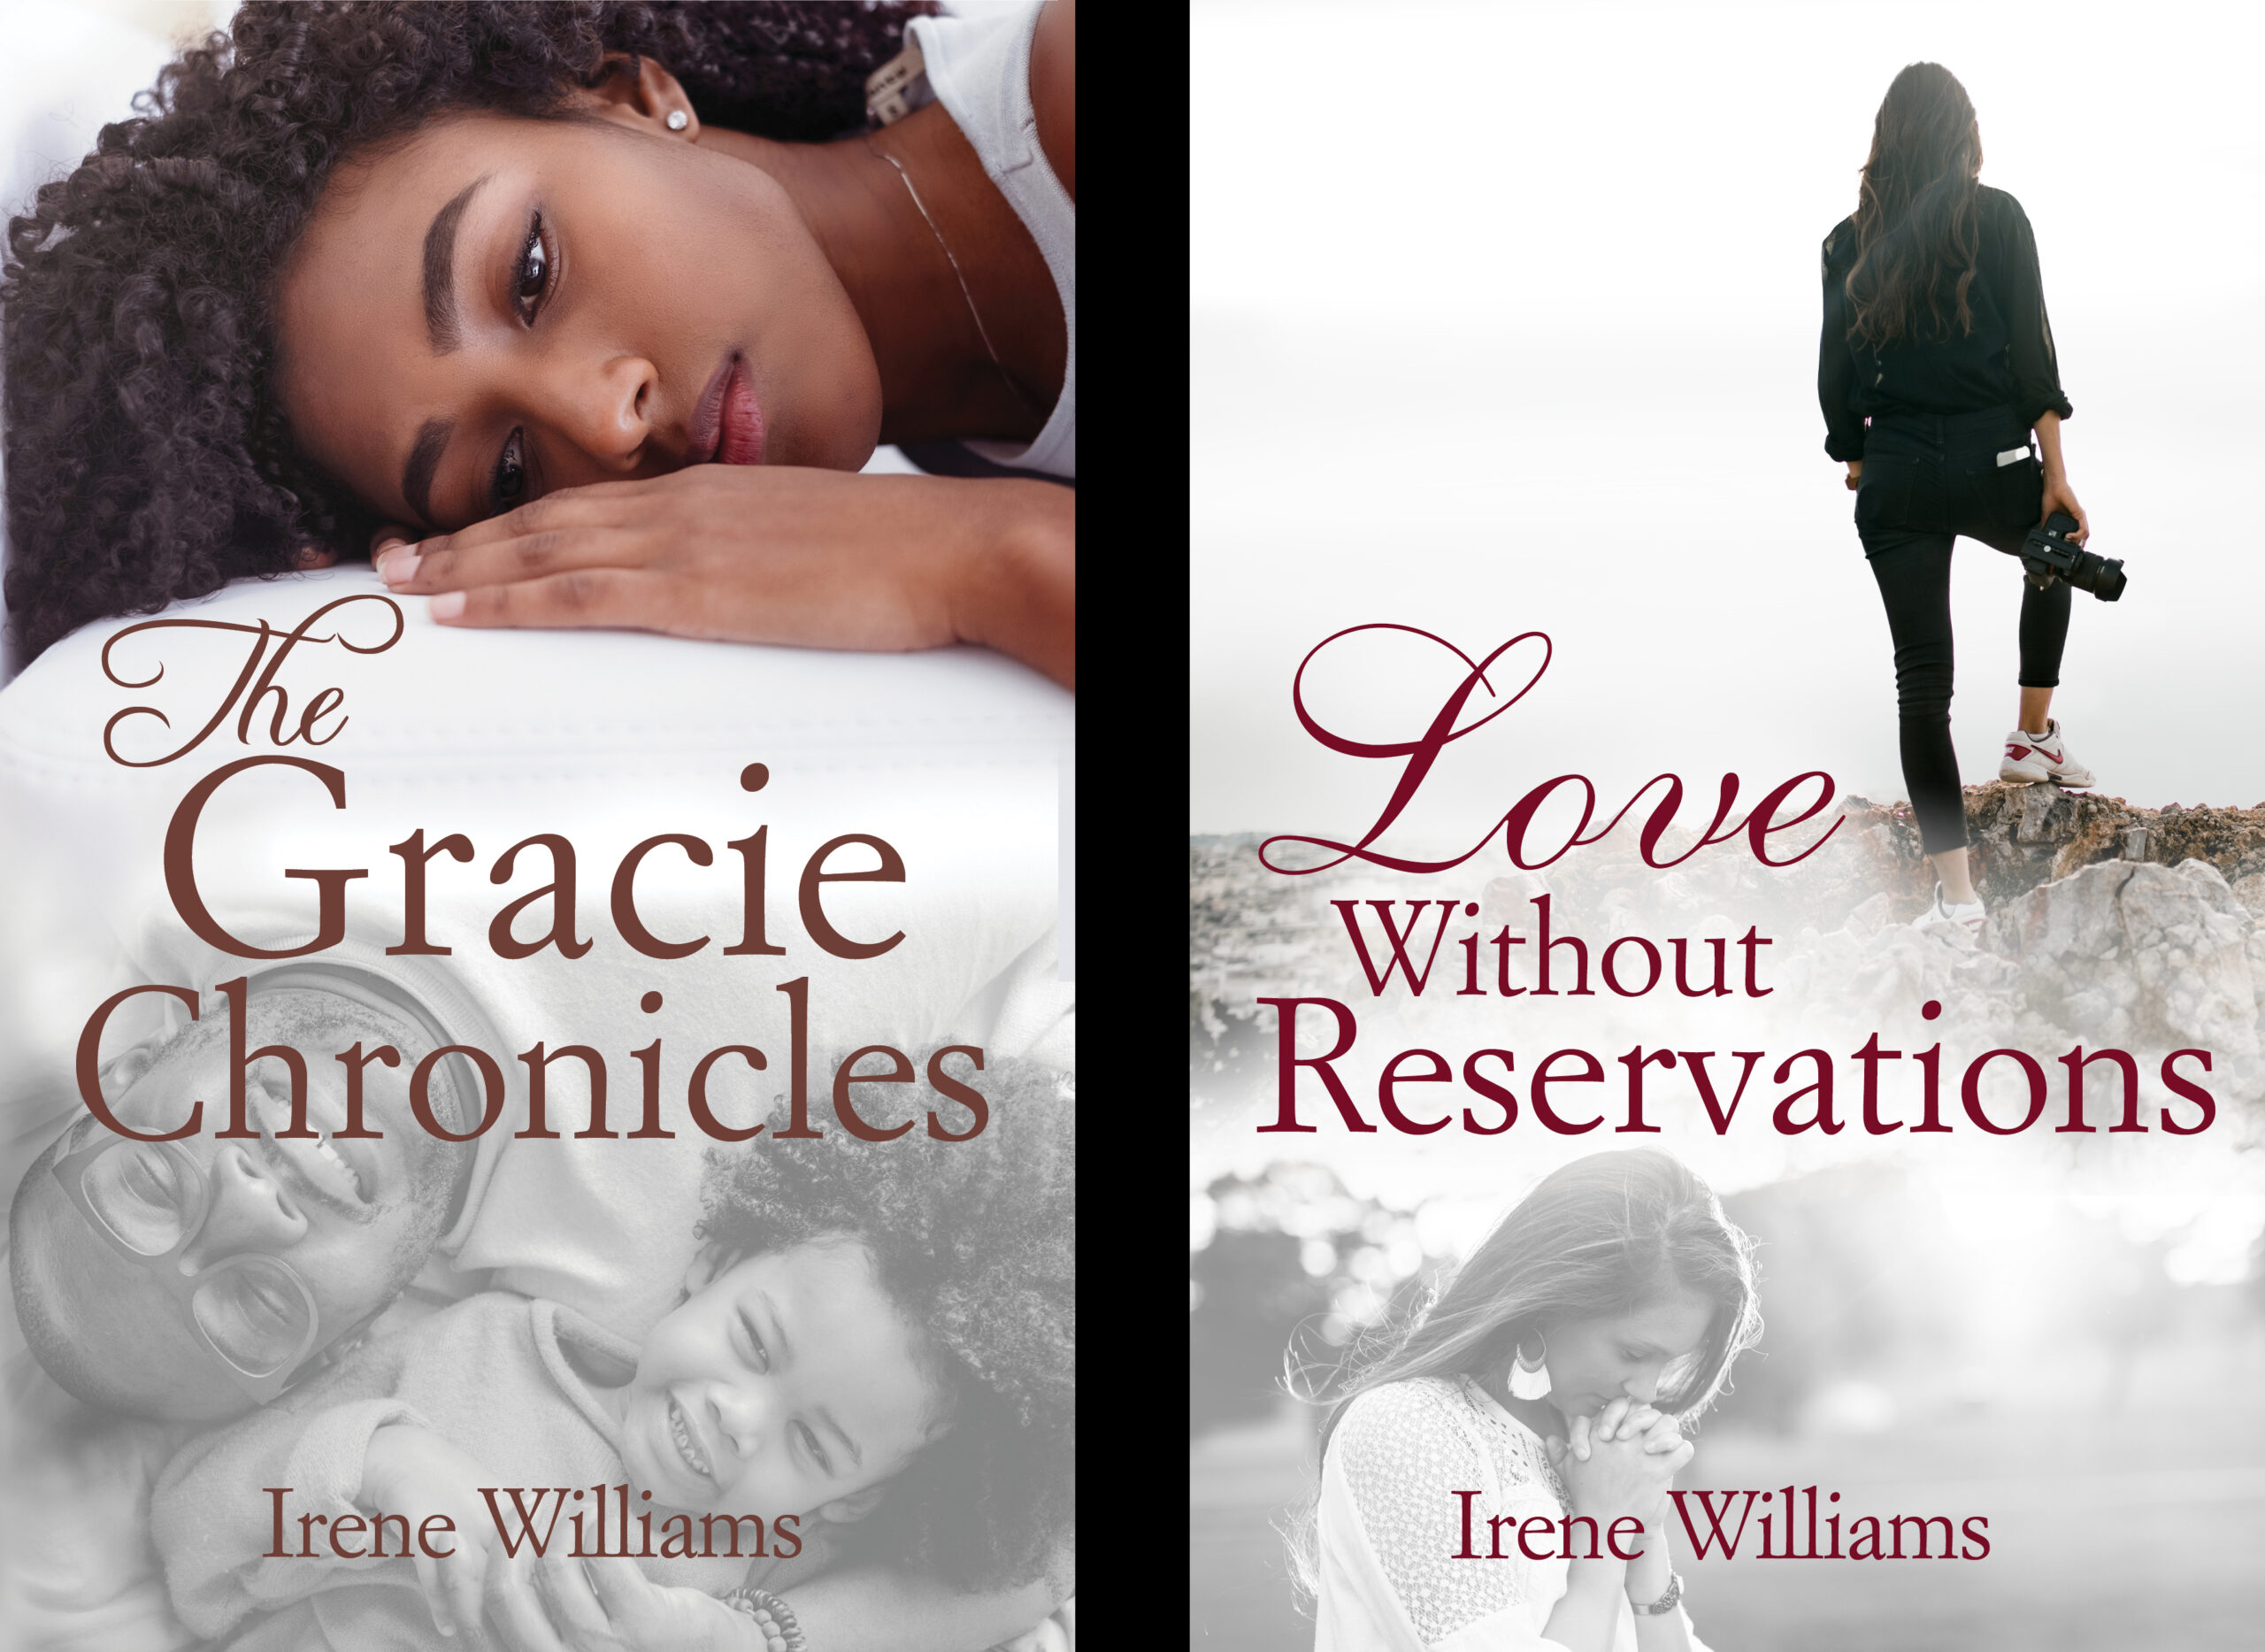 The Gracie Chronicles (New!) Love Without Reservations